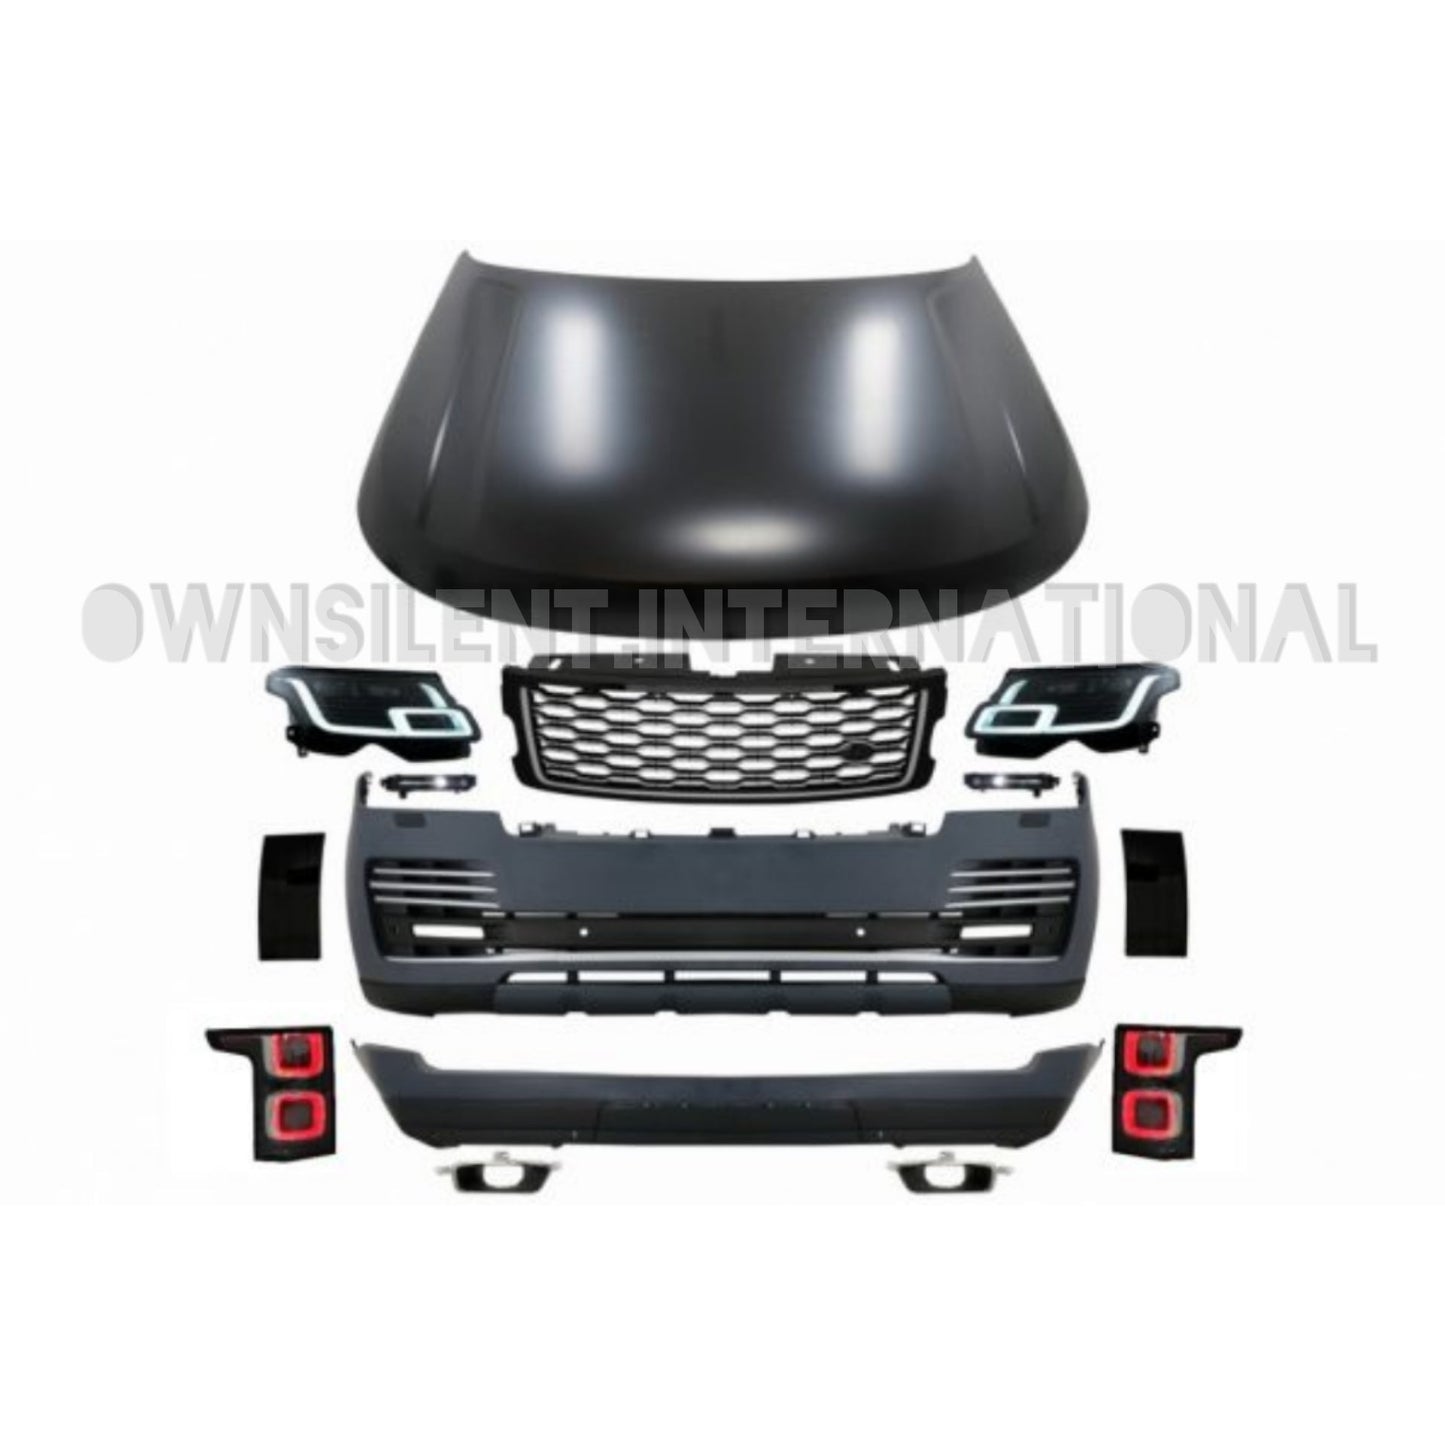 Complete Conversion Body Kit for Land Rover Range Rover IV Vogue SUV L405 (2013-2017) to 2018 Model